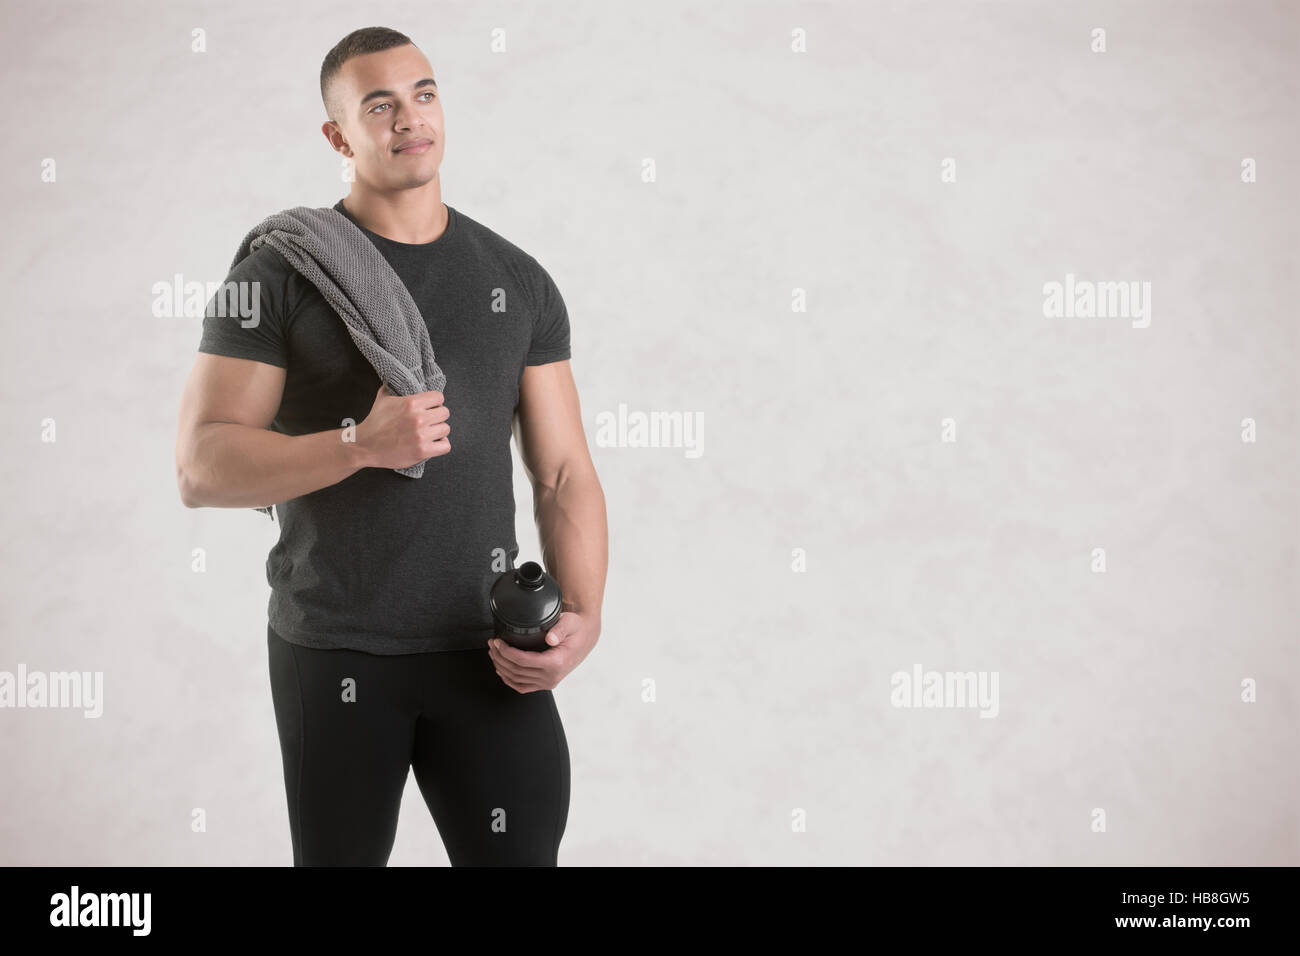 Man holding a protein shake after a workout in the gym, isolated in grey Stock Photo